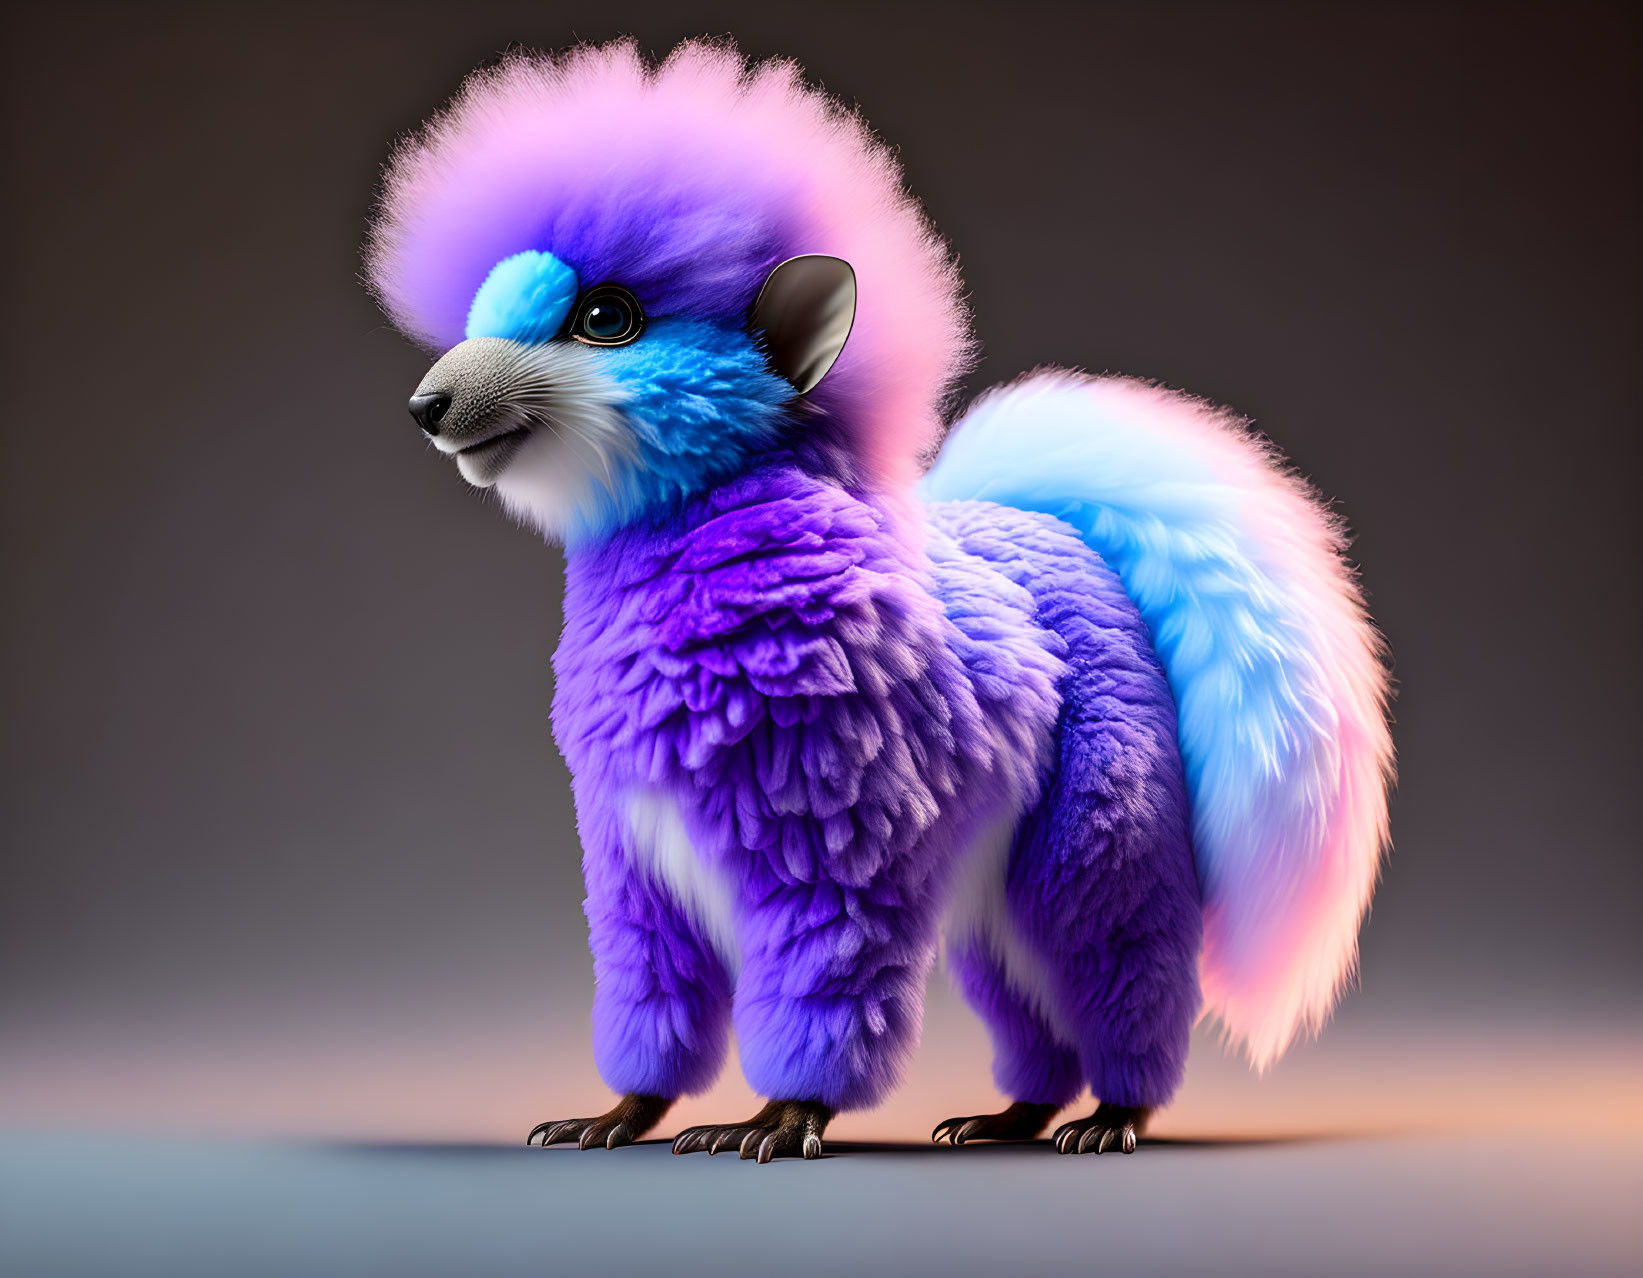 Colorful fluffy creature with electric blue and purple fur and bright blue eyes on neutral background